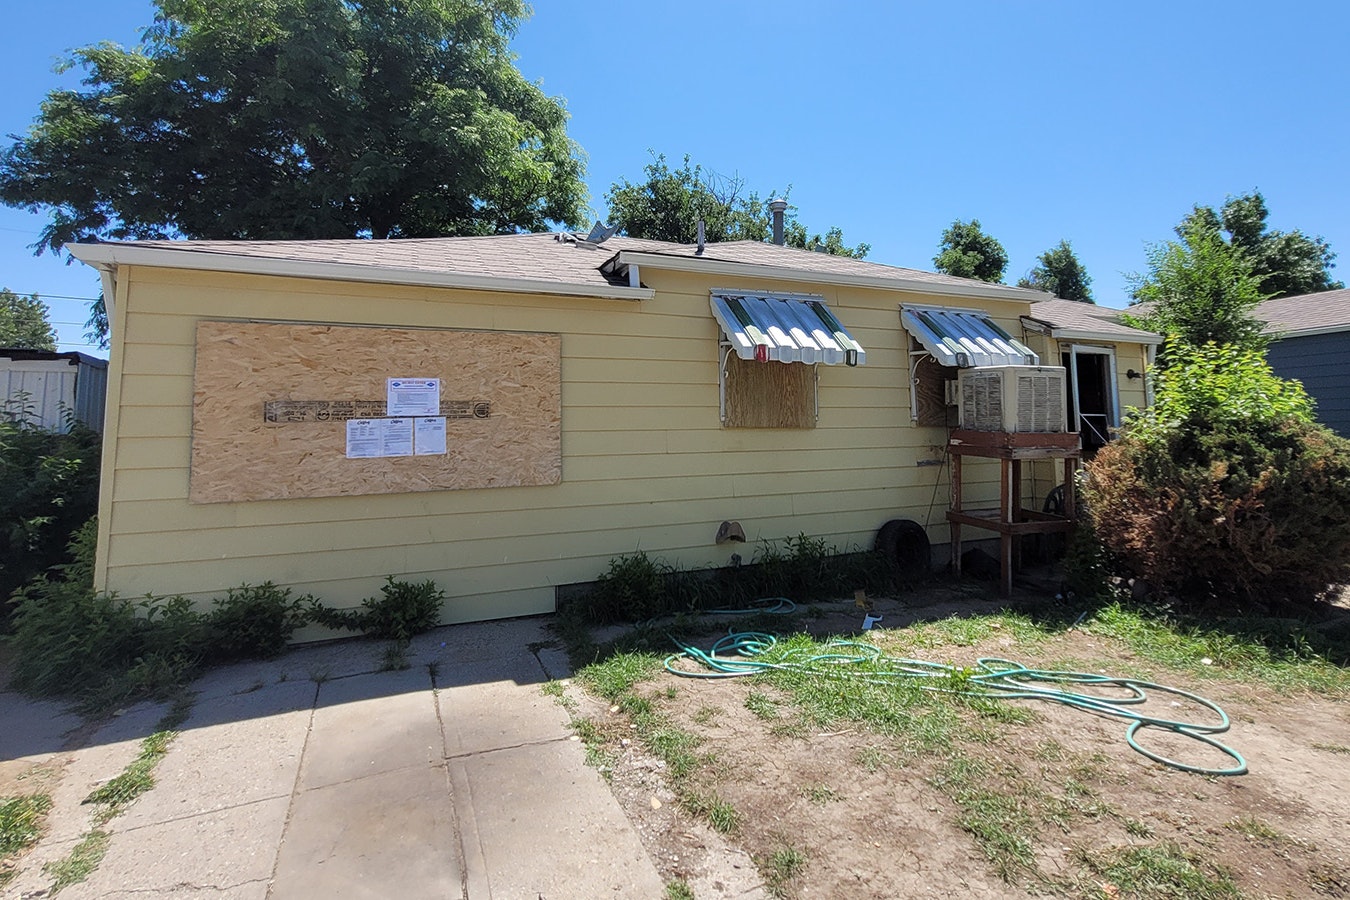 The City of Casper designed this house in the 1500 block of Westridge Place a “dangerous” building after drug activity and squatters took it over.